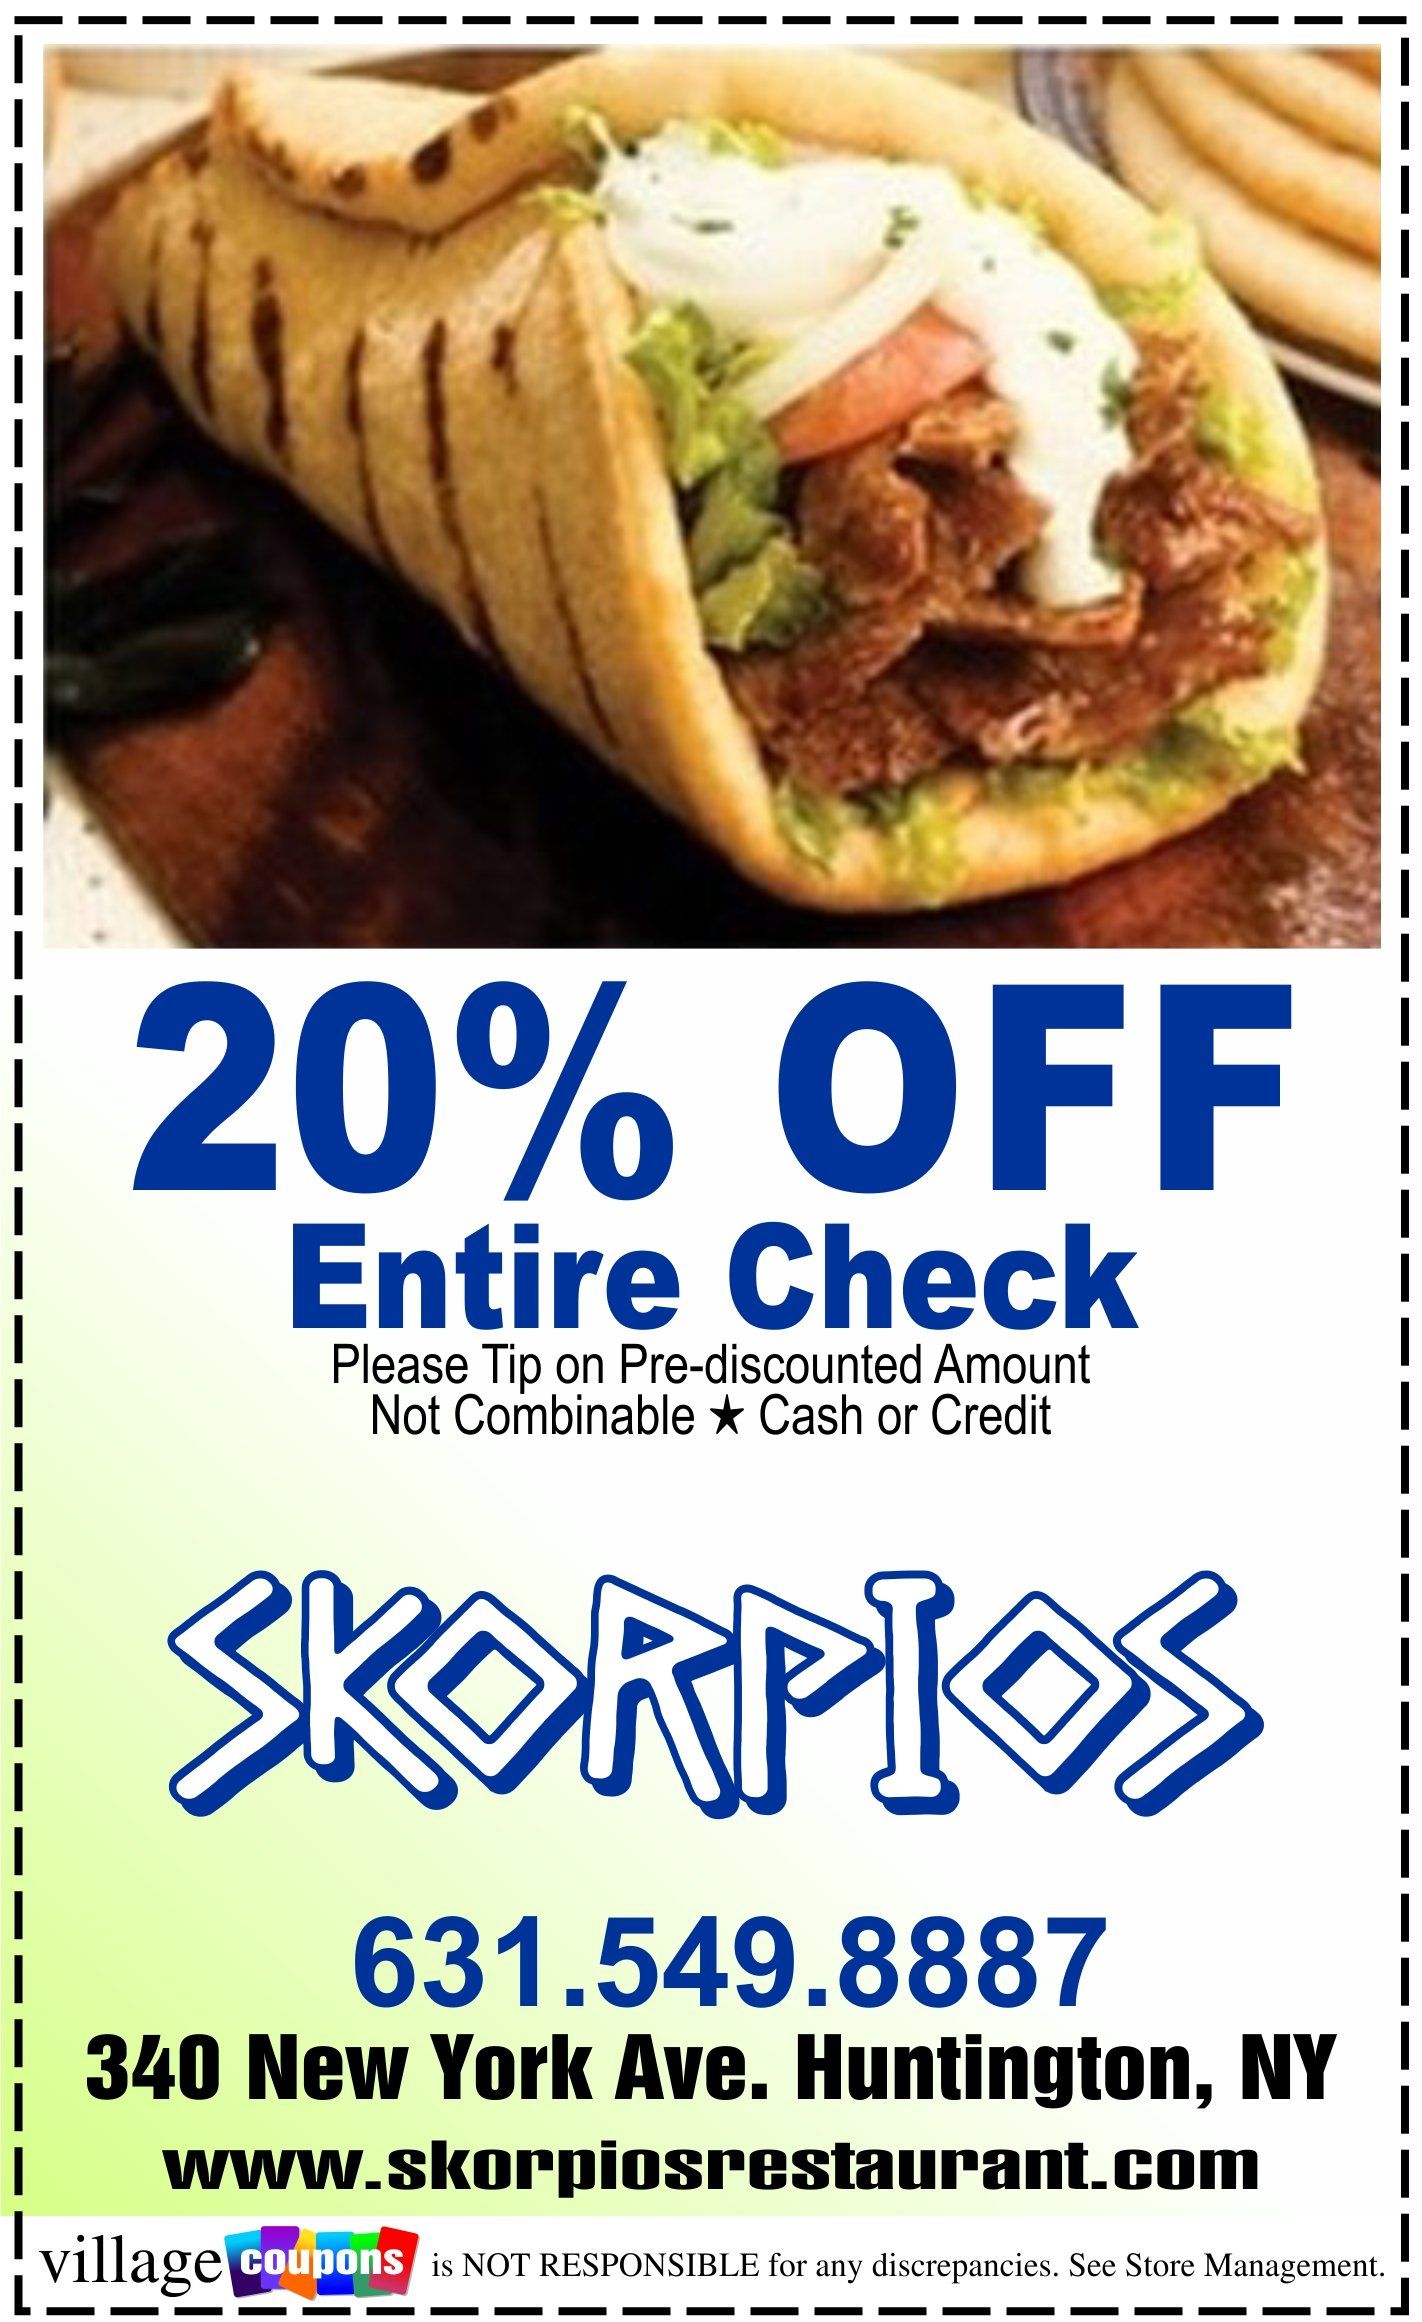 A coupon for skorpios offers a 20 % off entire check